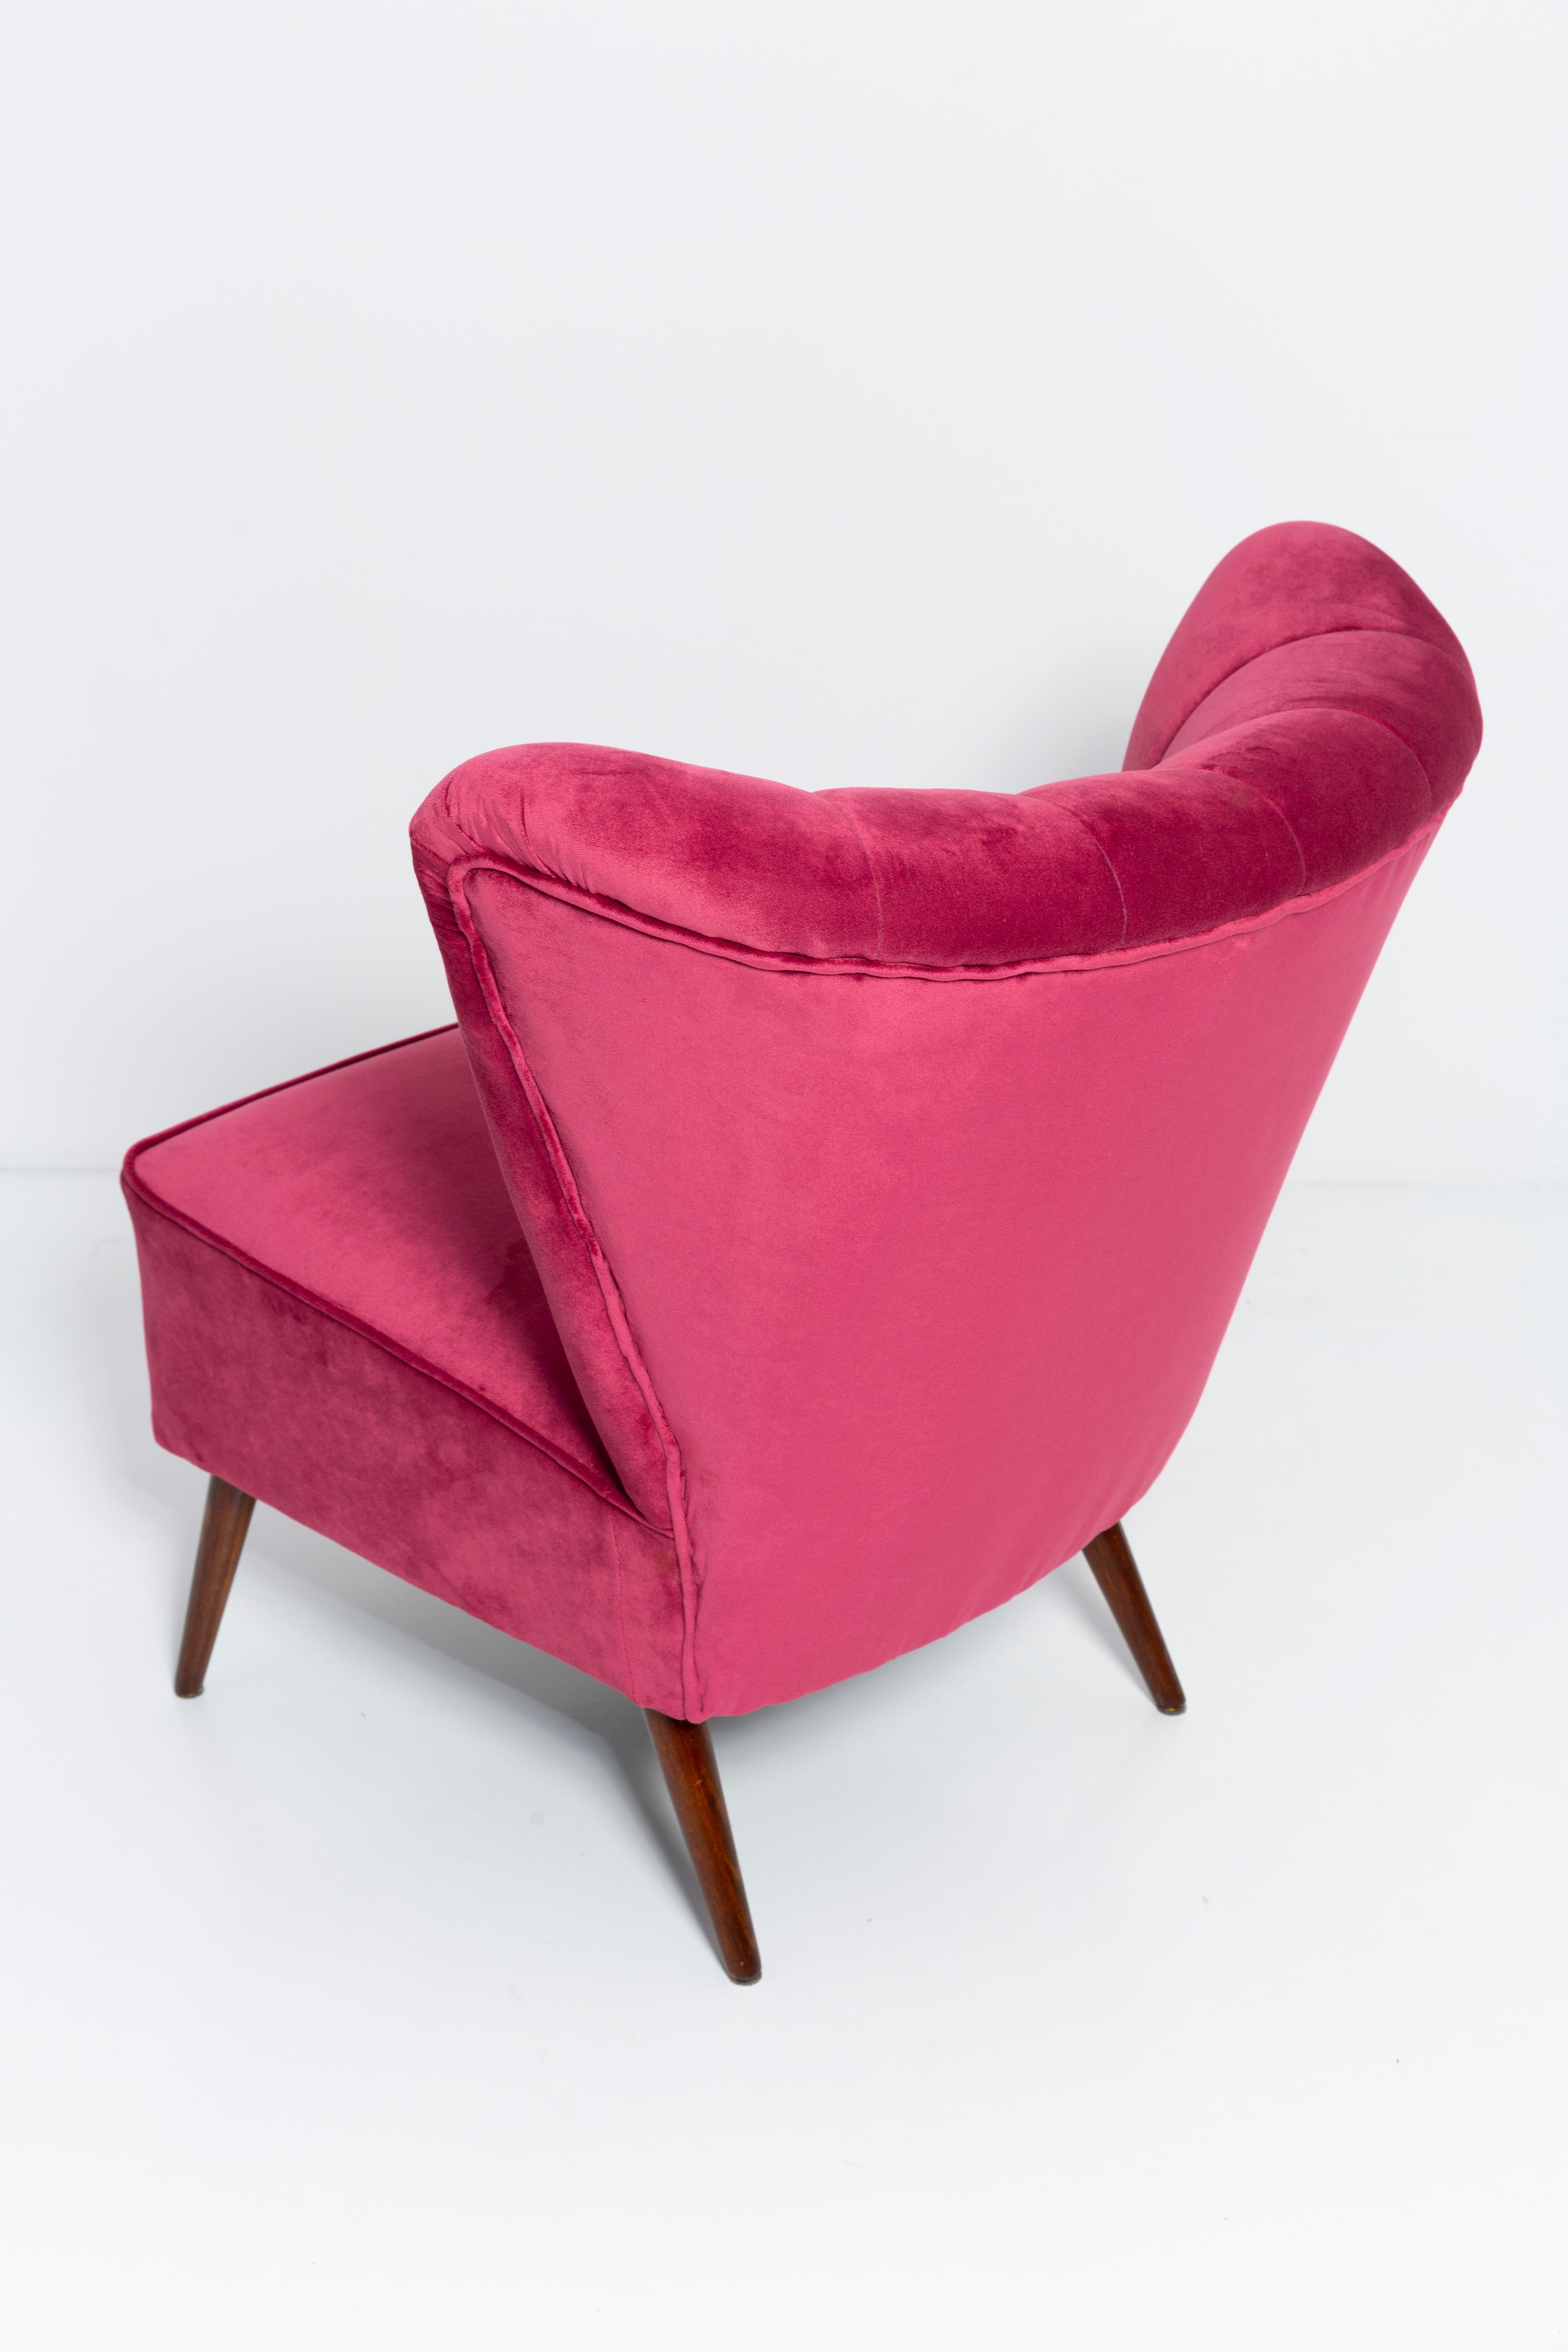 Set of Two Midcentury Magenta Pink Velvet Club Armchairs, Europe, 1960s For Sale 3